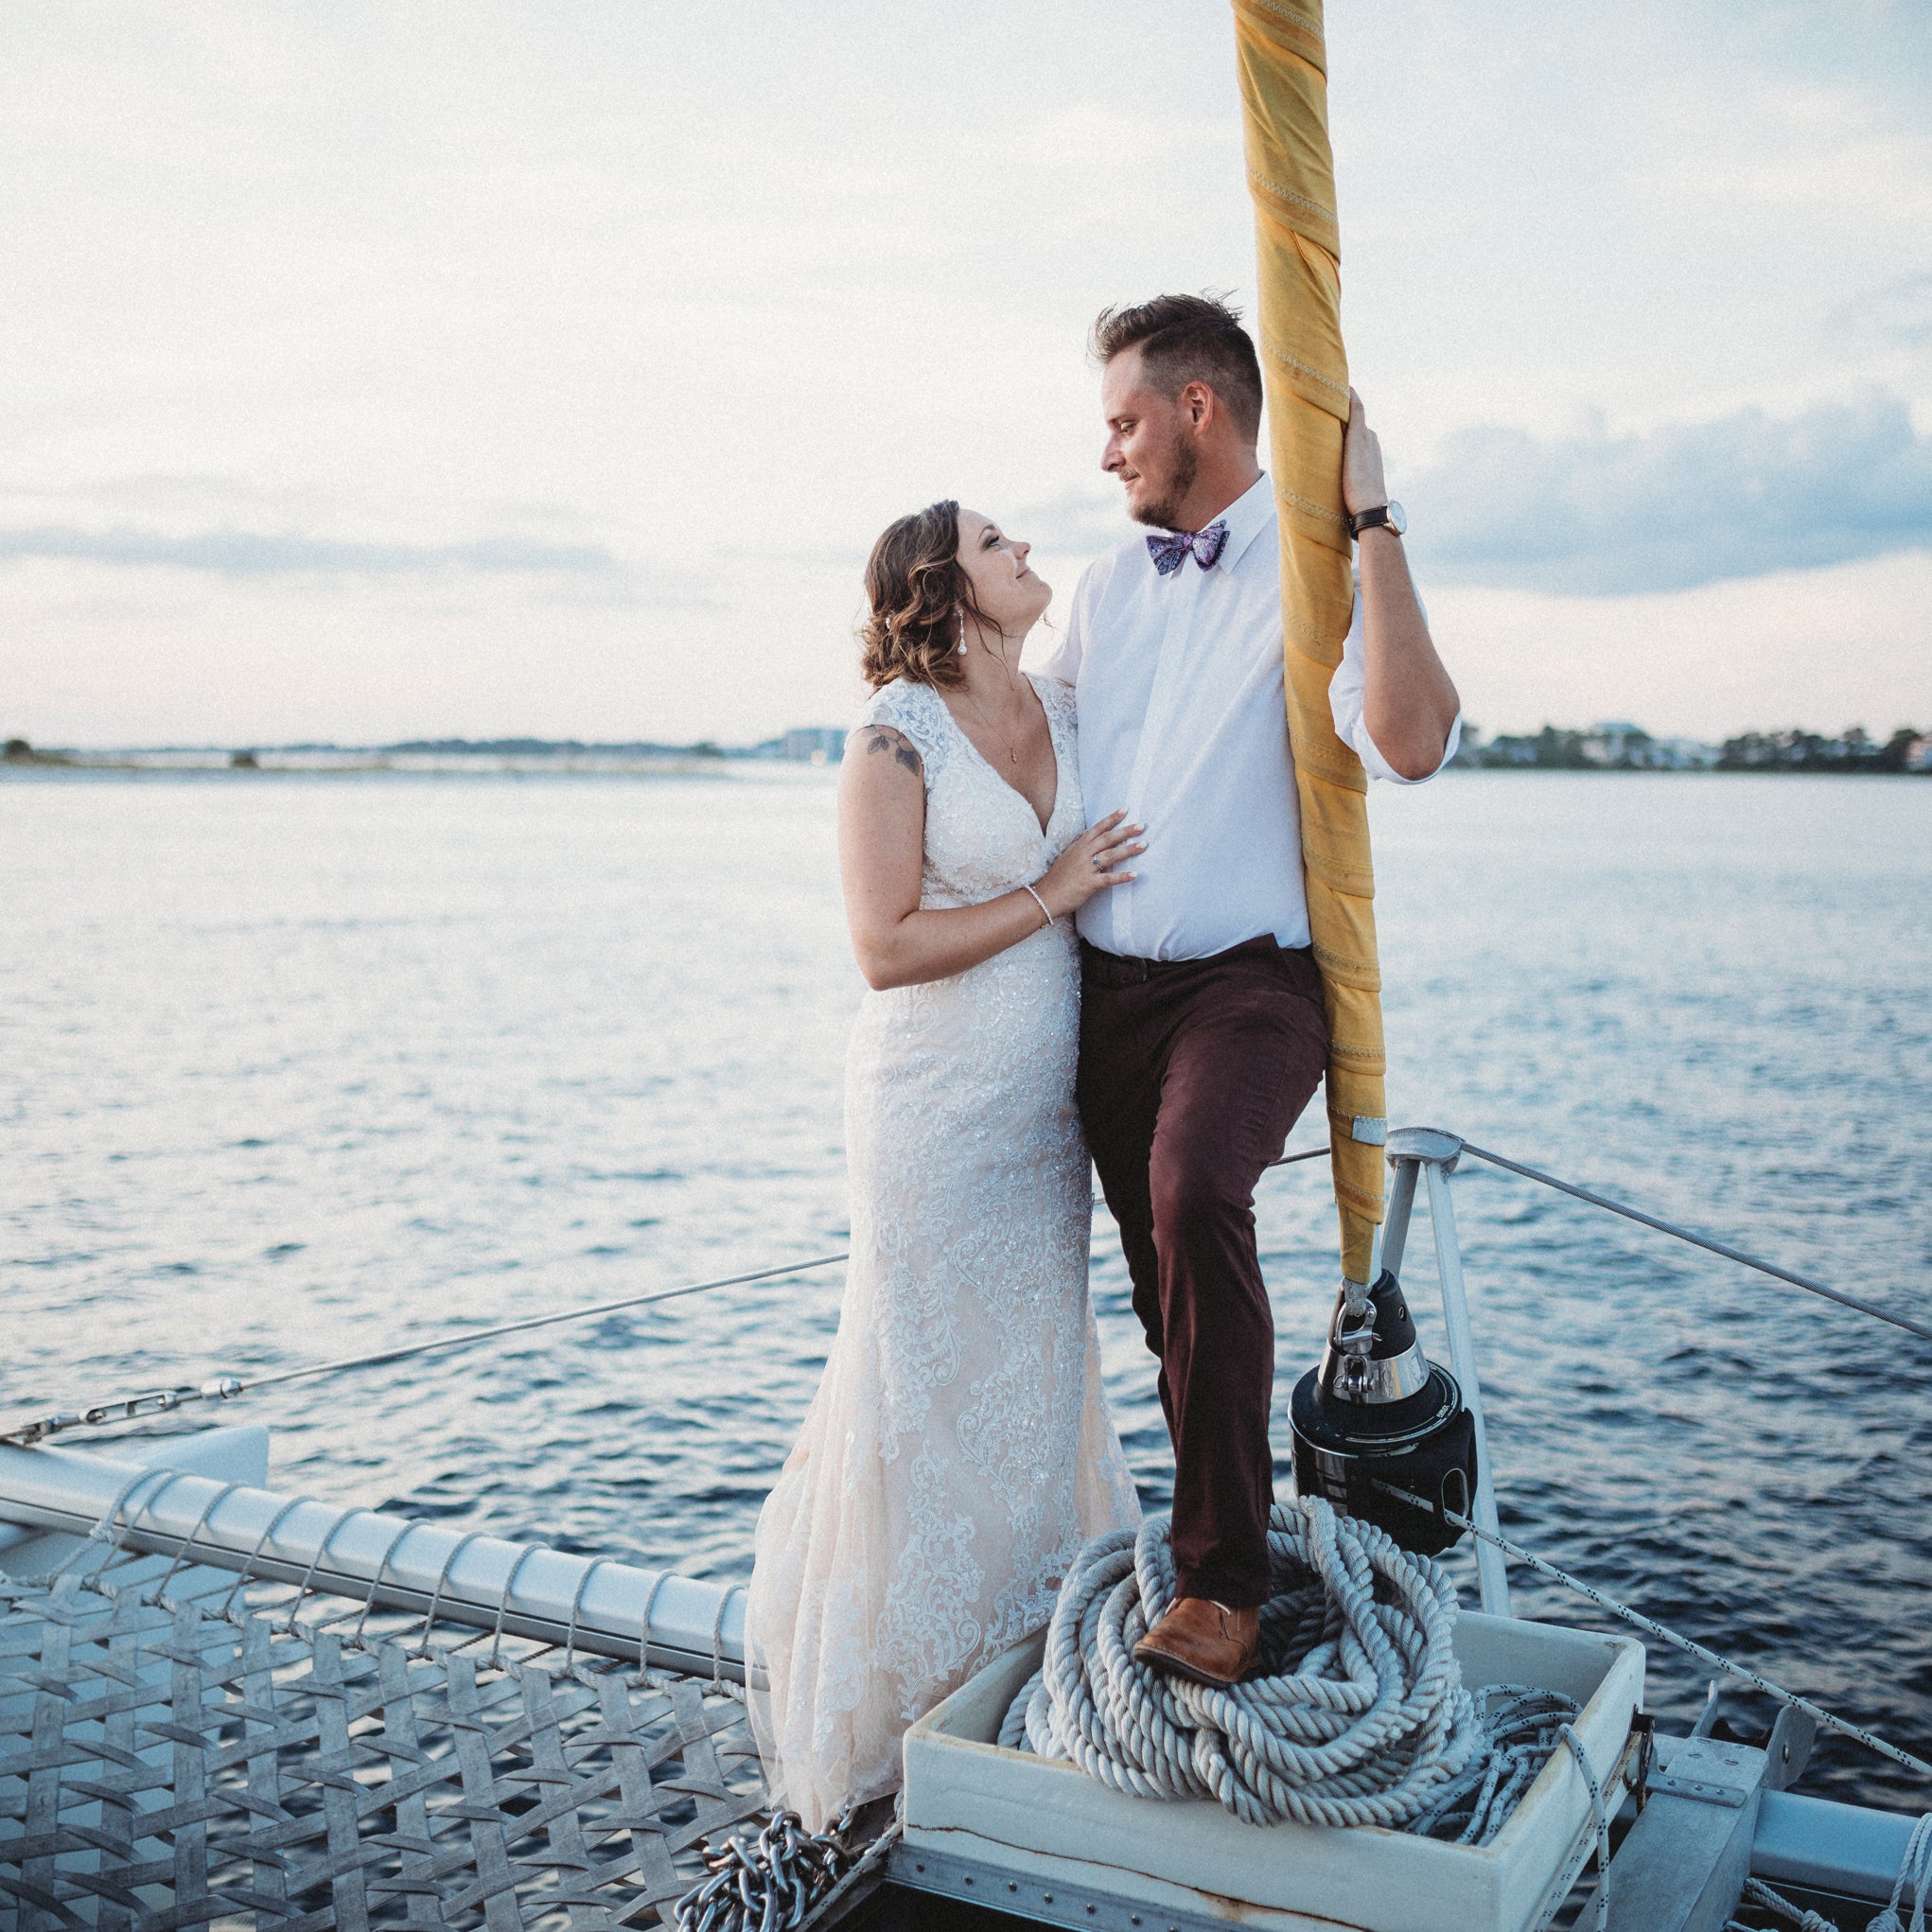 Sunset Cruise Wedding Package (All Inclusive) - The Wedding Shop